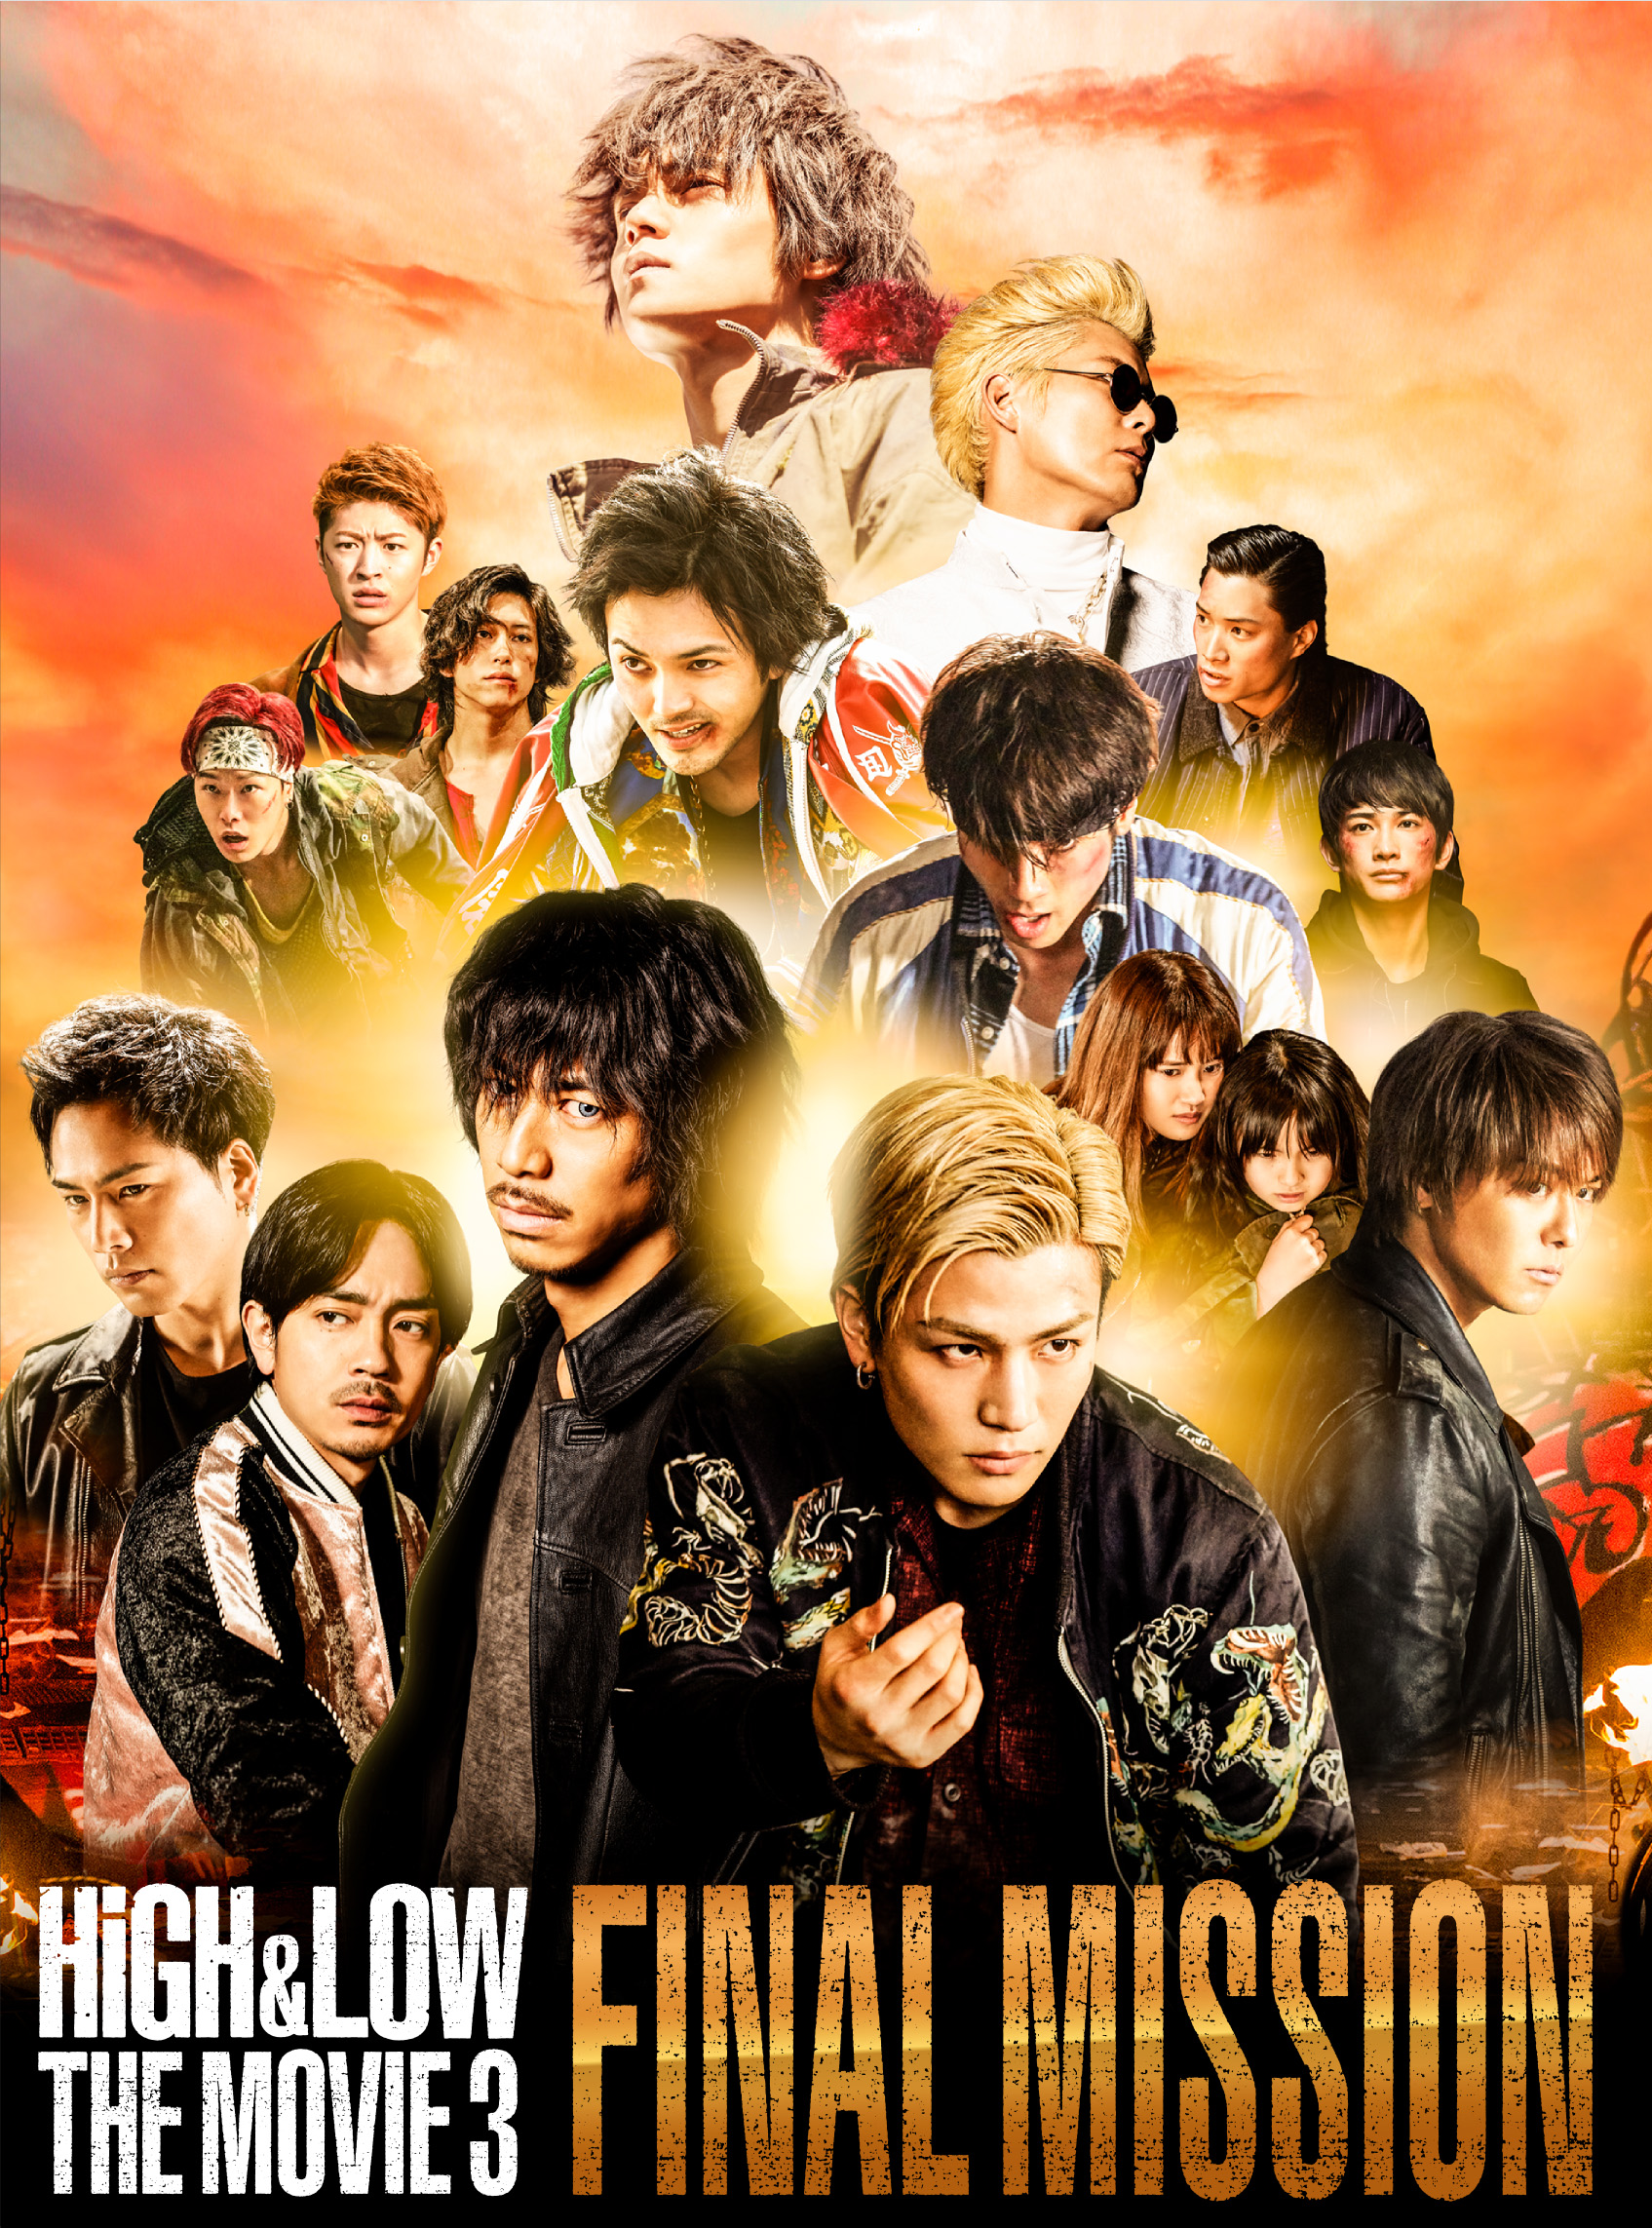 HiGH & LOW THE MOVIE 2 / END OF SKY